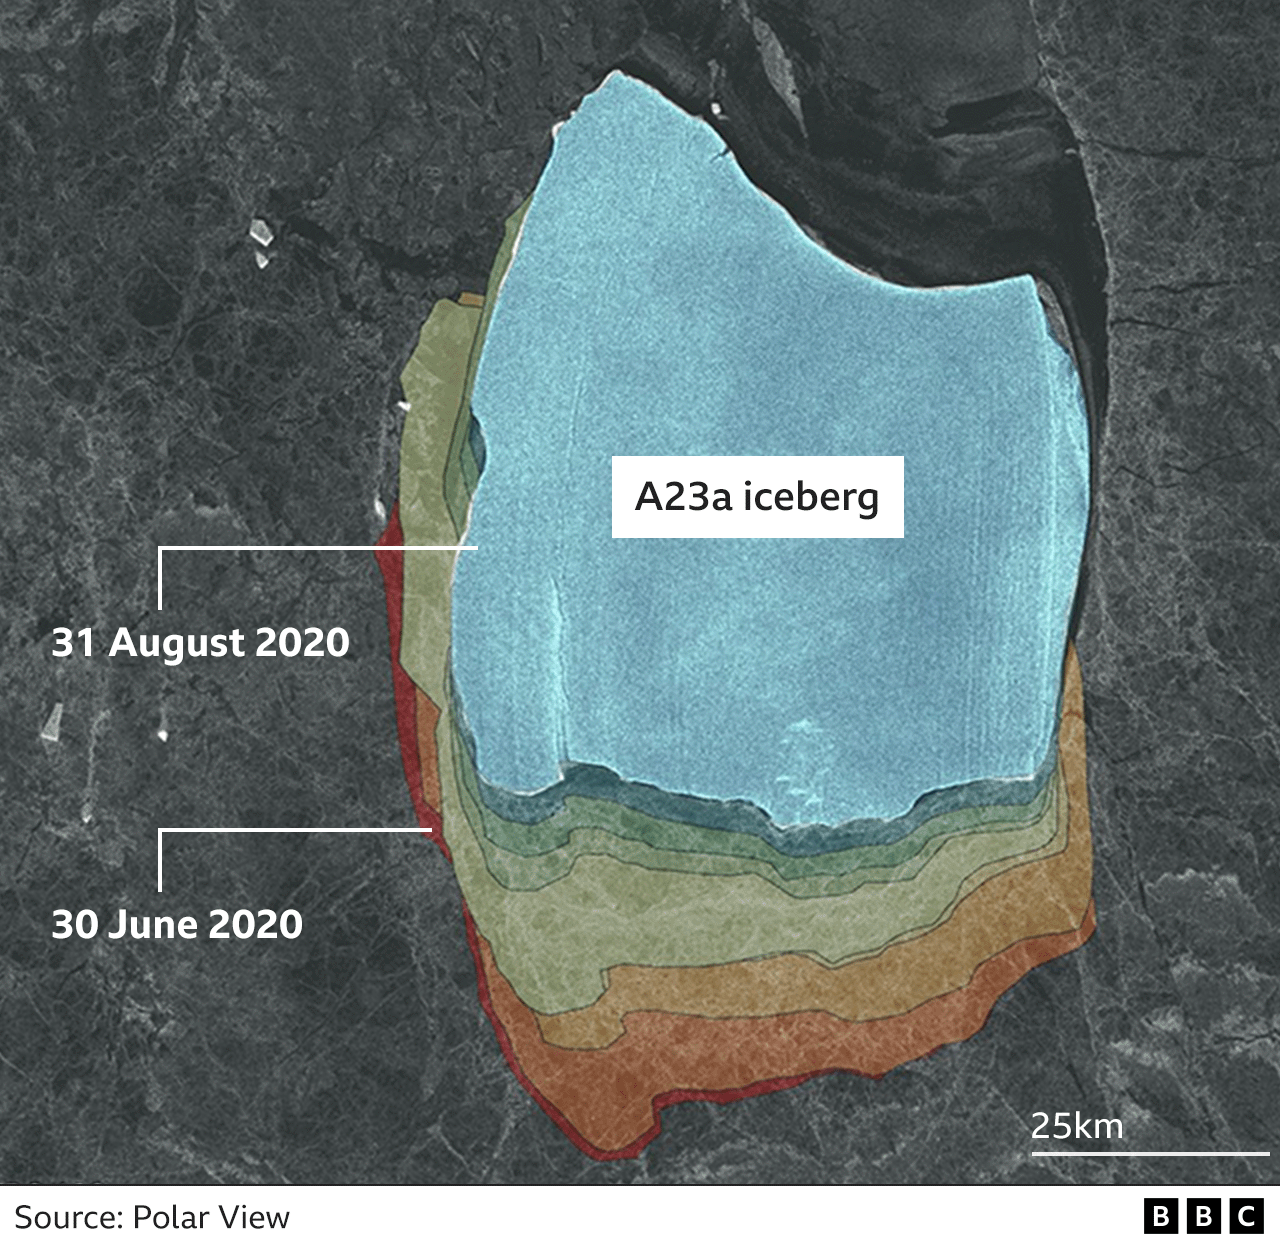 Iceberg A23a first began to stir in 2020